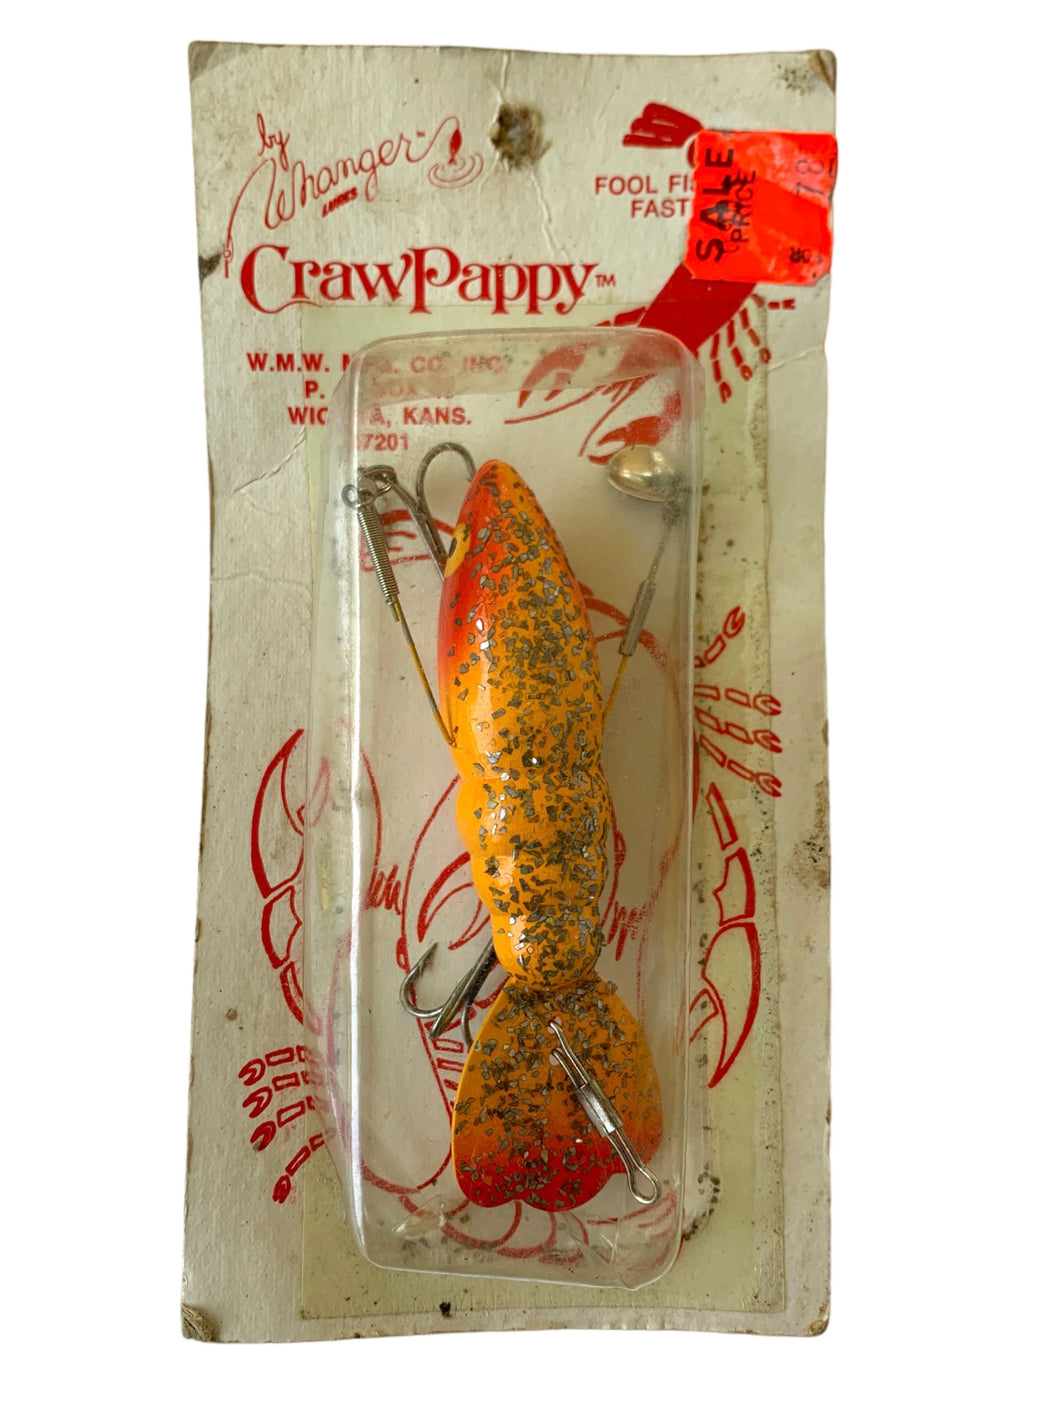 WHANGER LURES of Wichita, Kansas CRAWPAPPY Fishing Lure Front Package View